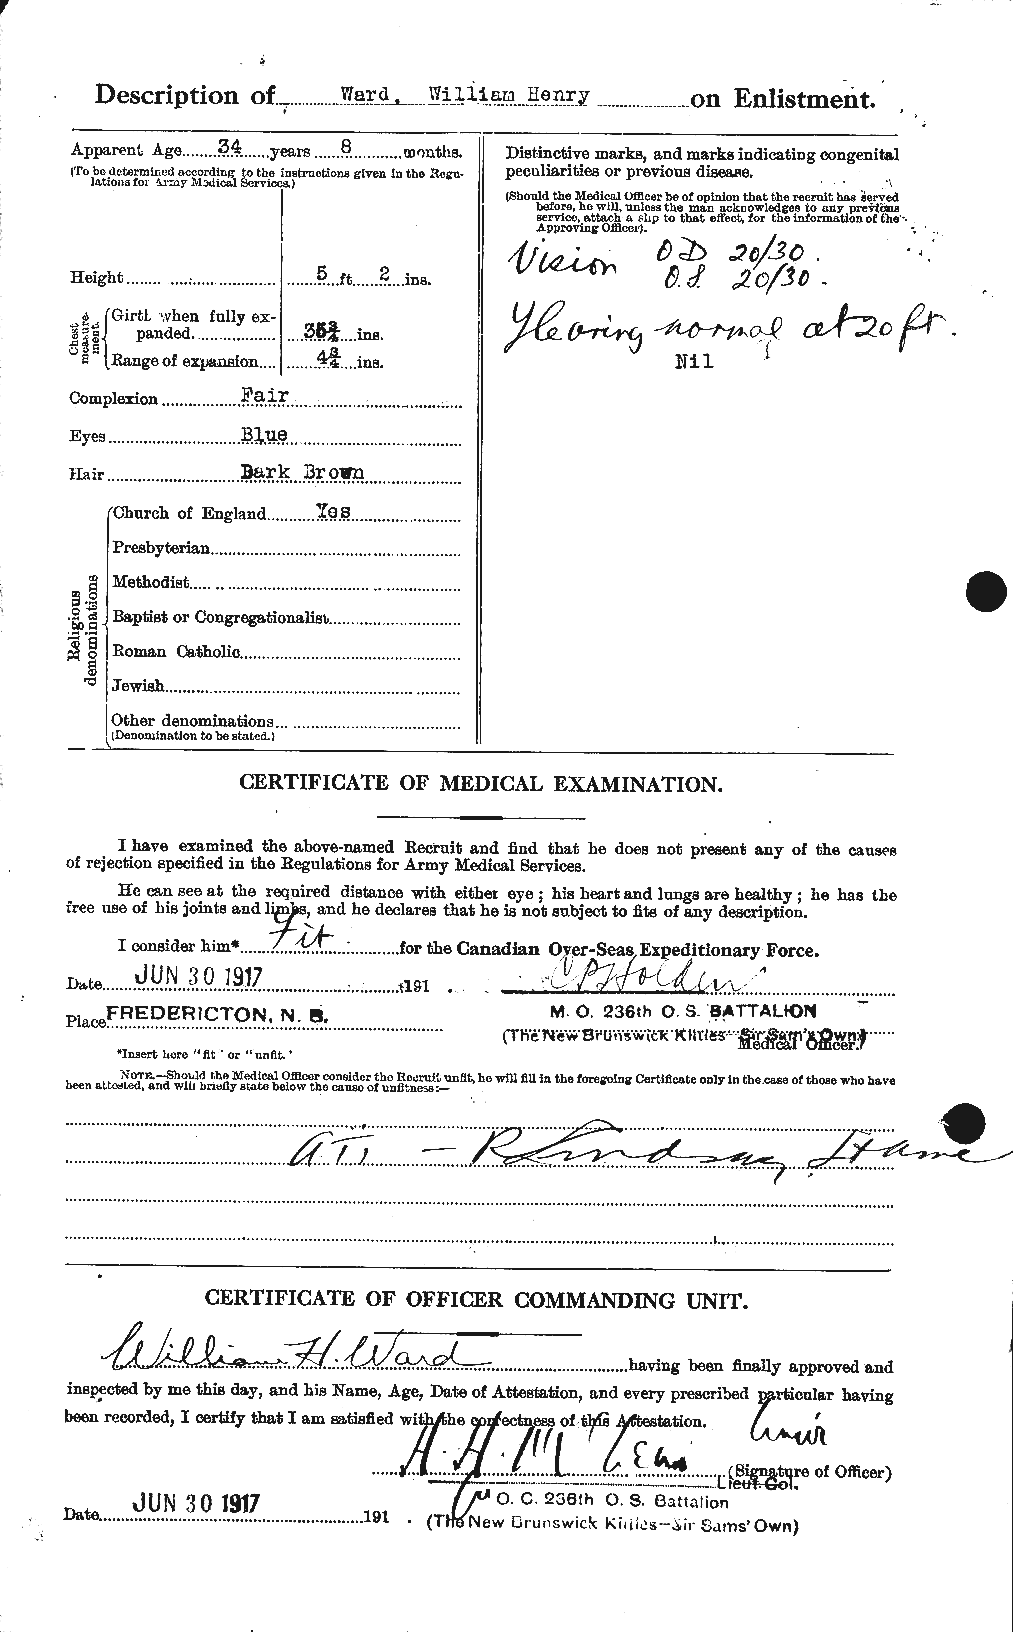 Personnel Records of the First World War - CEF 659824b